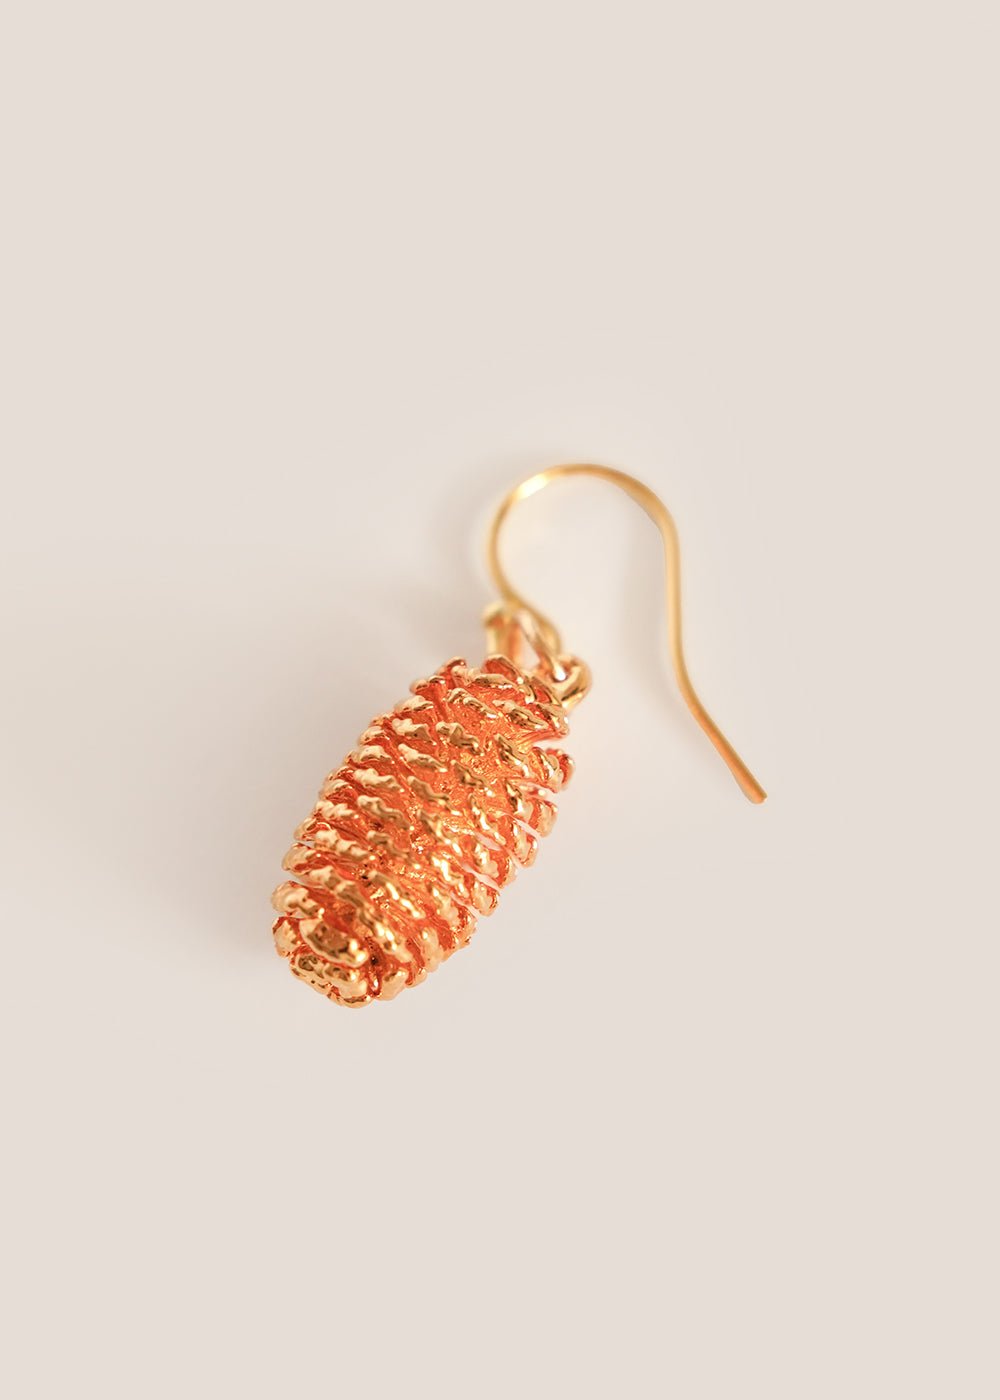 Dauphinette Baby Pinecone Earring - New Classics Studios Sustainable Ethical Fashion Canada